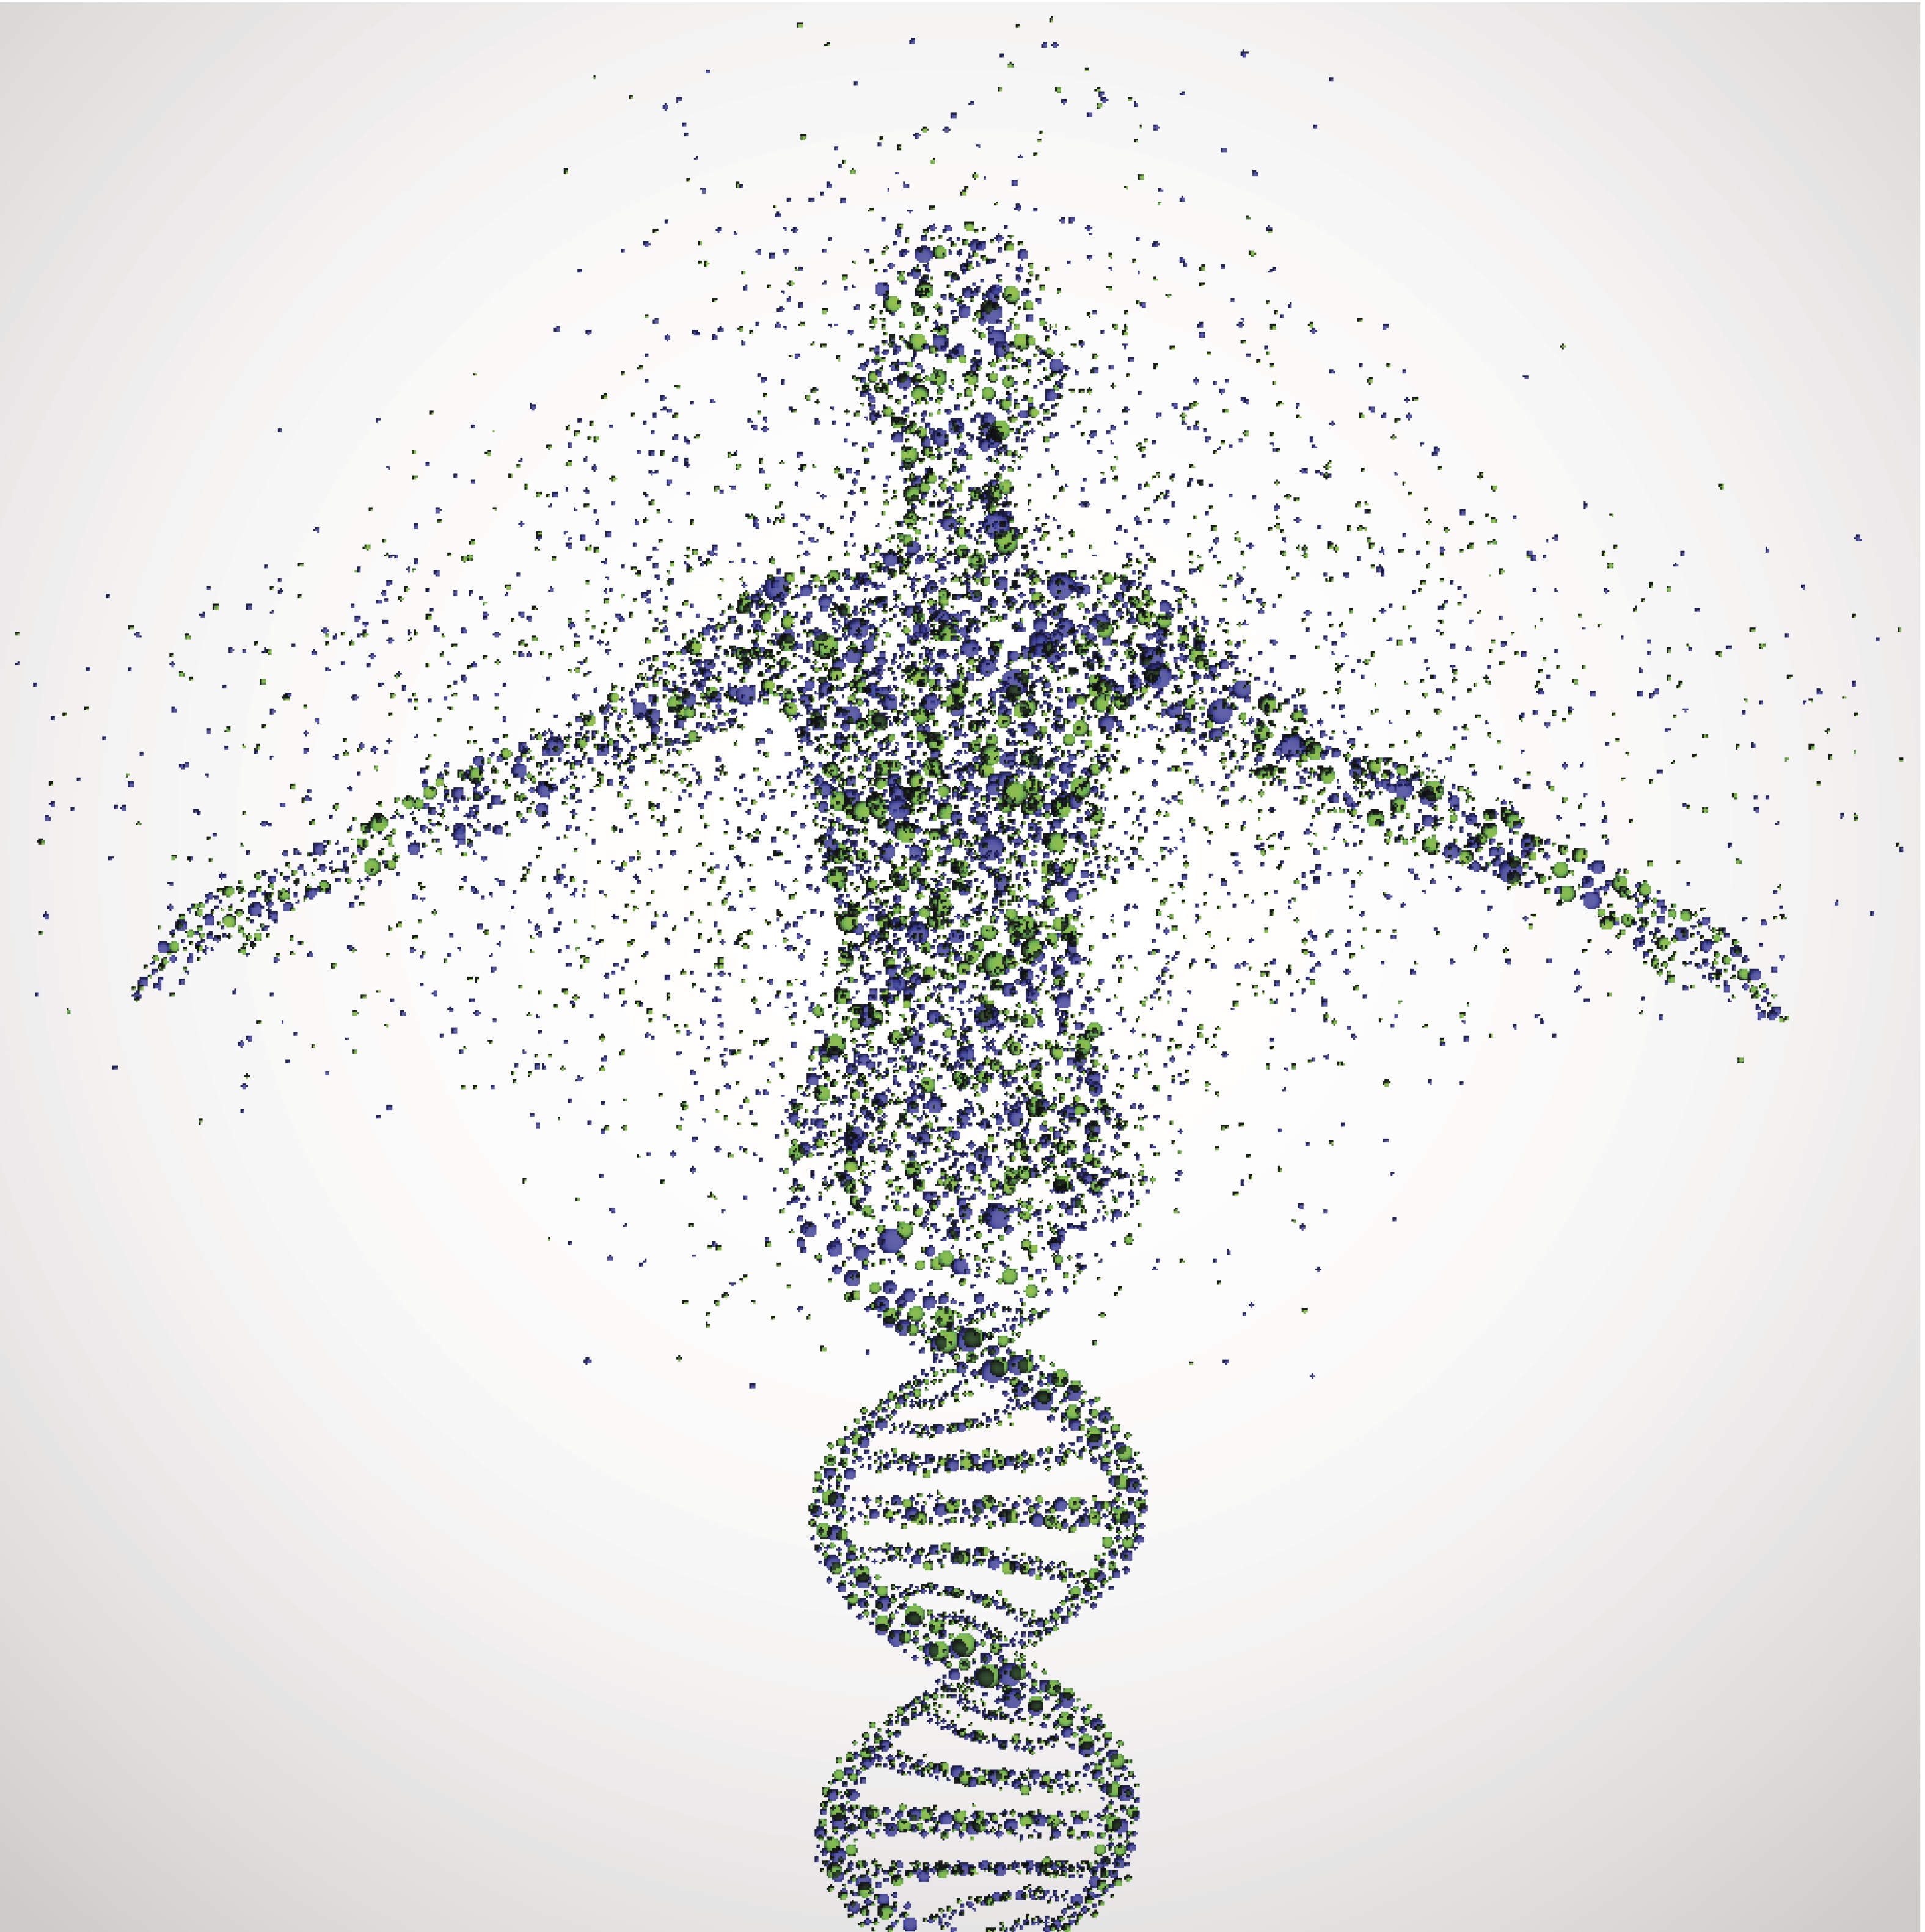 The Human Genome Project is completed. The project, started in 1990, identified all the 20,000 - 25,000 genes in human DNA and determined the sequences of the 3 billion chemical base pairs that make up human DNA.The information gained from the human genome project may lead to revolutionary new ways to diagnose, treat, and prevent thousands of disorders; including cancer.121US Department of Energy: Office of Science. http://genomics.energy.gov/                      2National Institutes of Health; National Human Genome Research Institute. www.genome.gov      